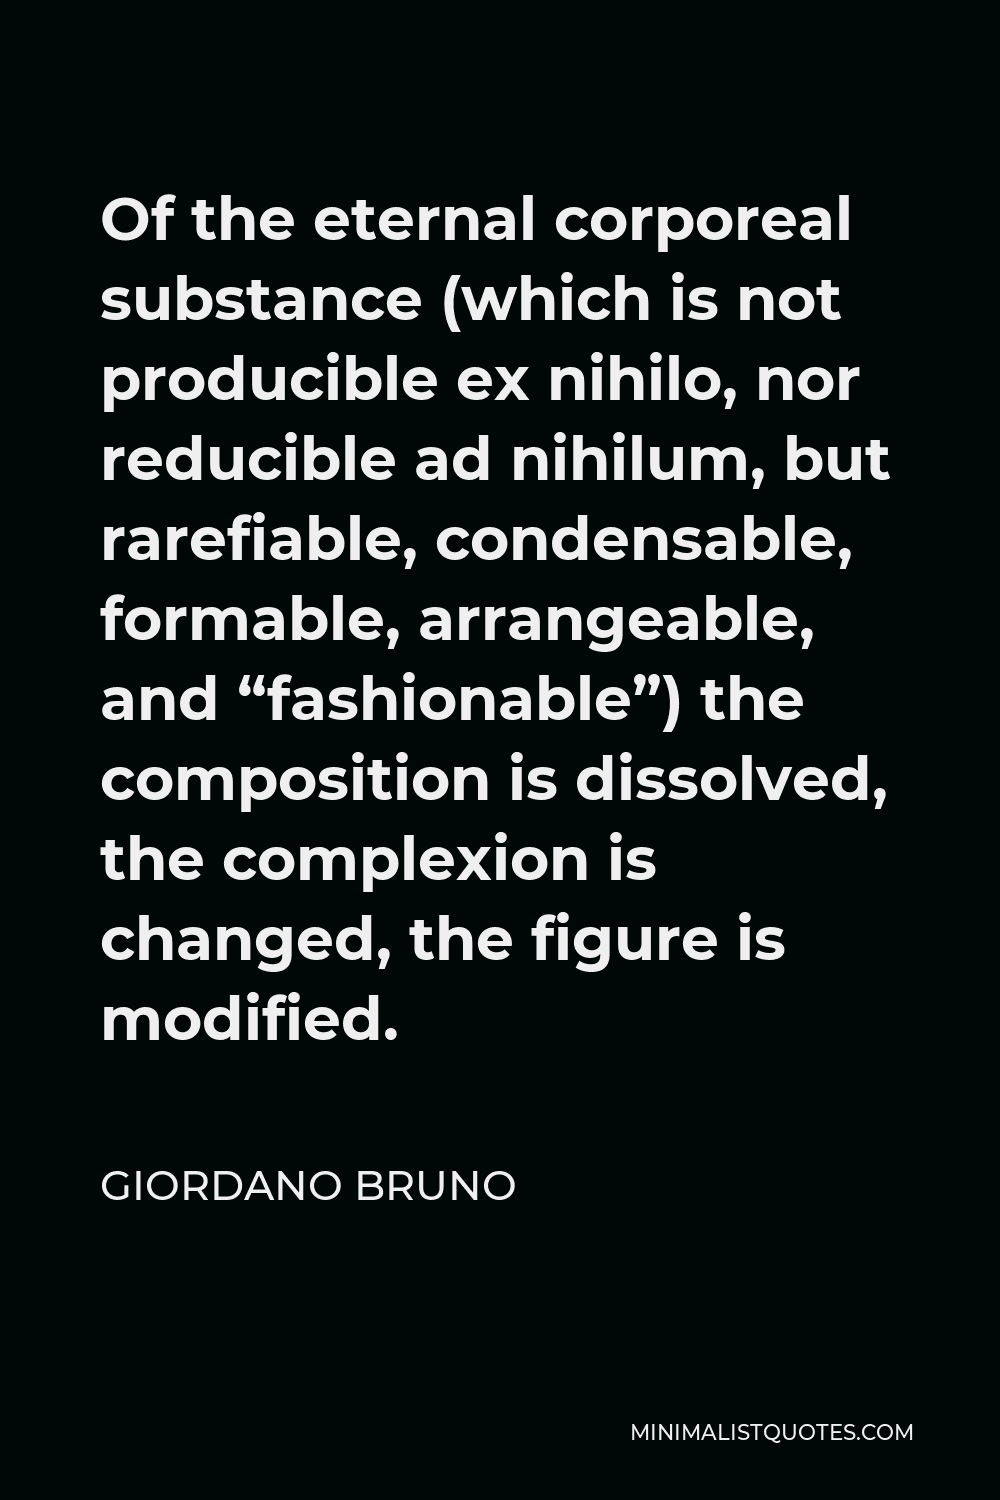 Giordano Bruno Quote - Of the eternal corporeal substance (which is not producible ex nihilo, nor reducible ad nihilum, but rarefiable, condensable, formable, arrangeable, and “fashionable”) the composition is dissolved, the complexion is changed, the figure is modified.